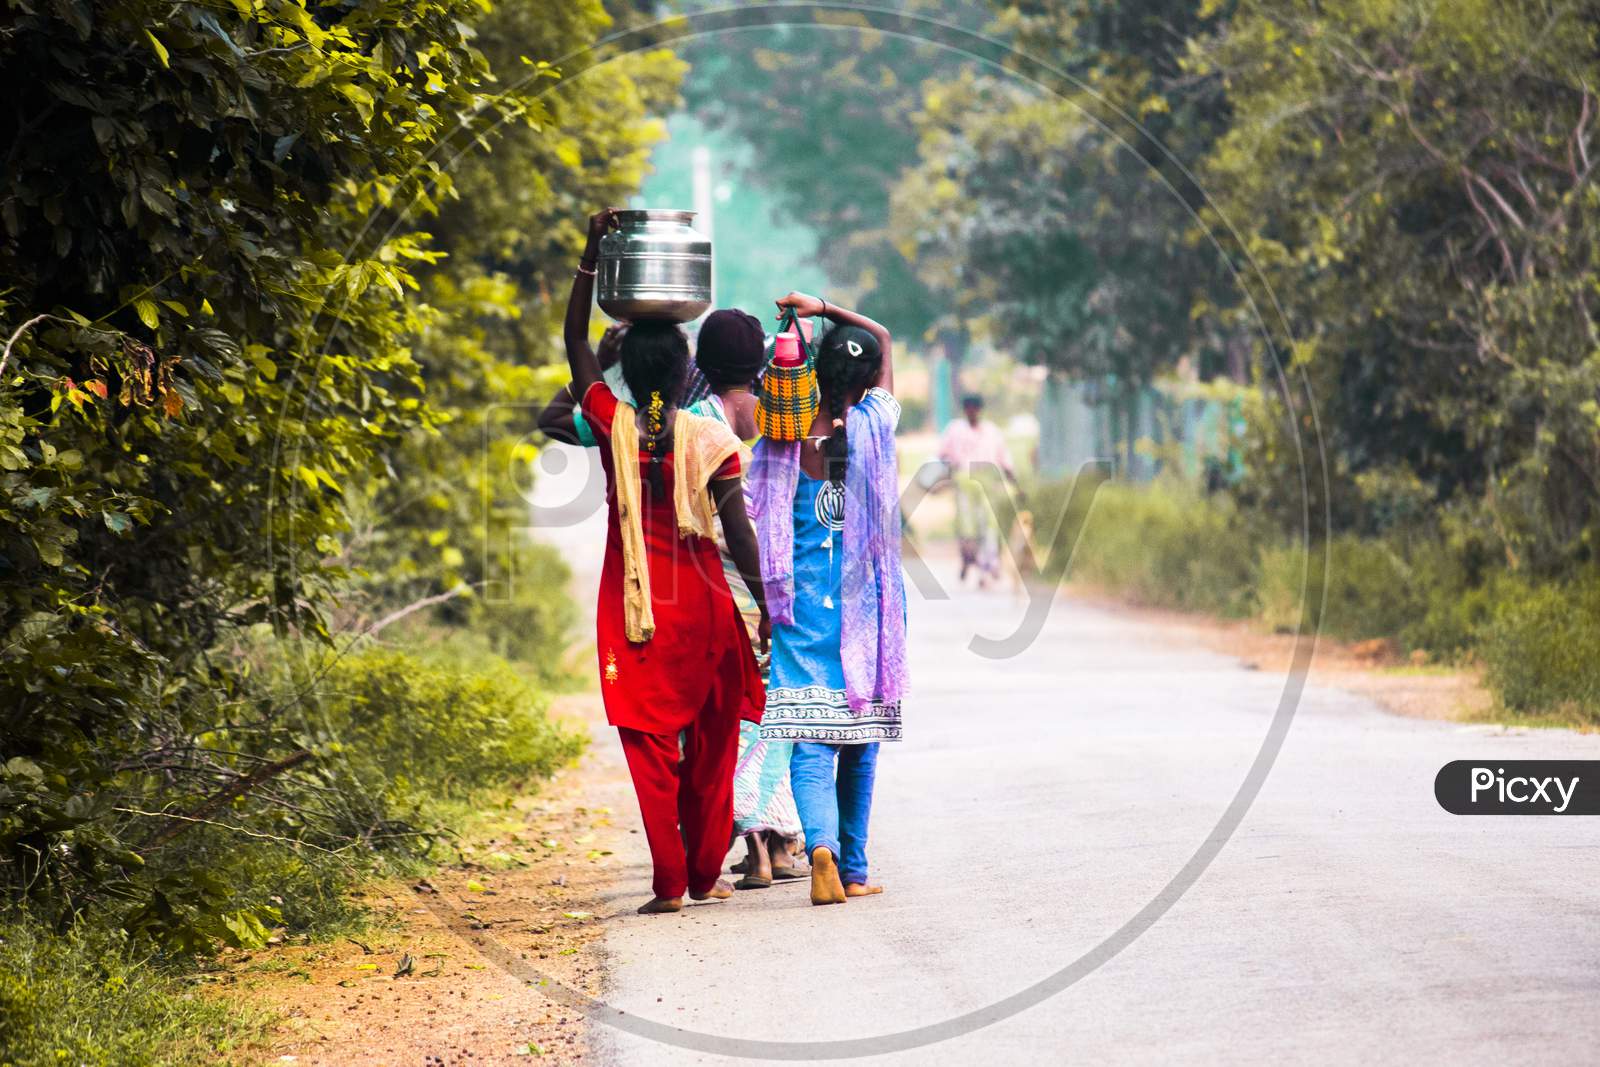 Indian Rural Village Girls Carrying Water Vessels on Head